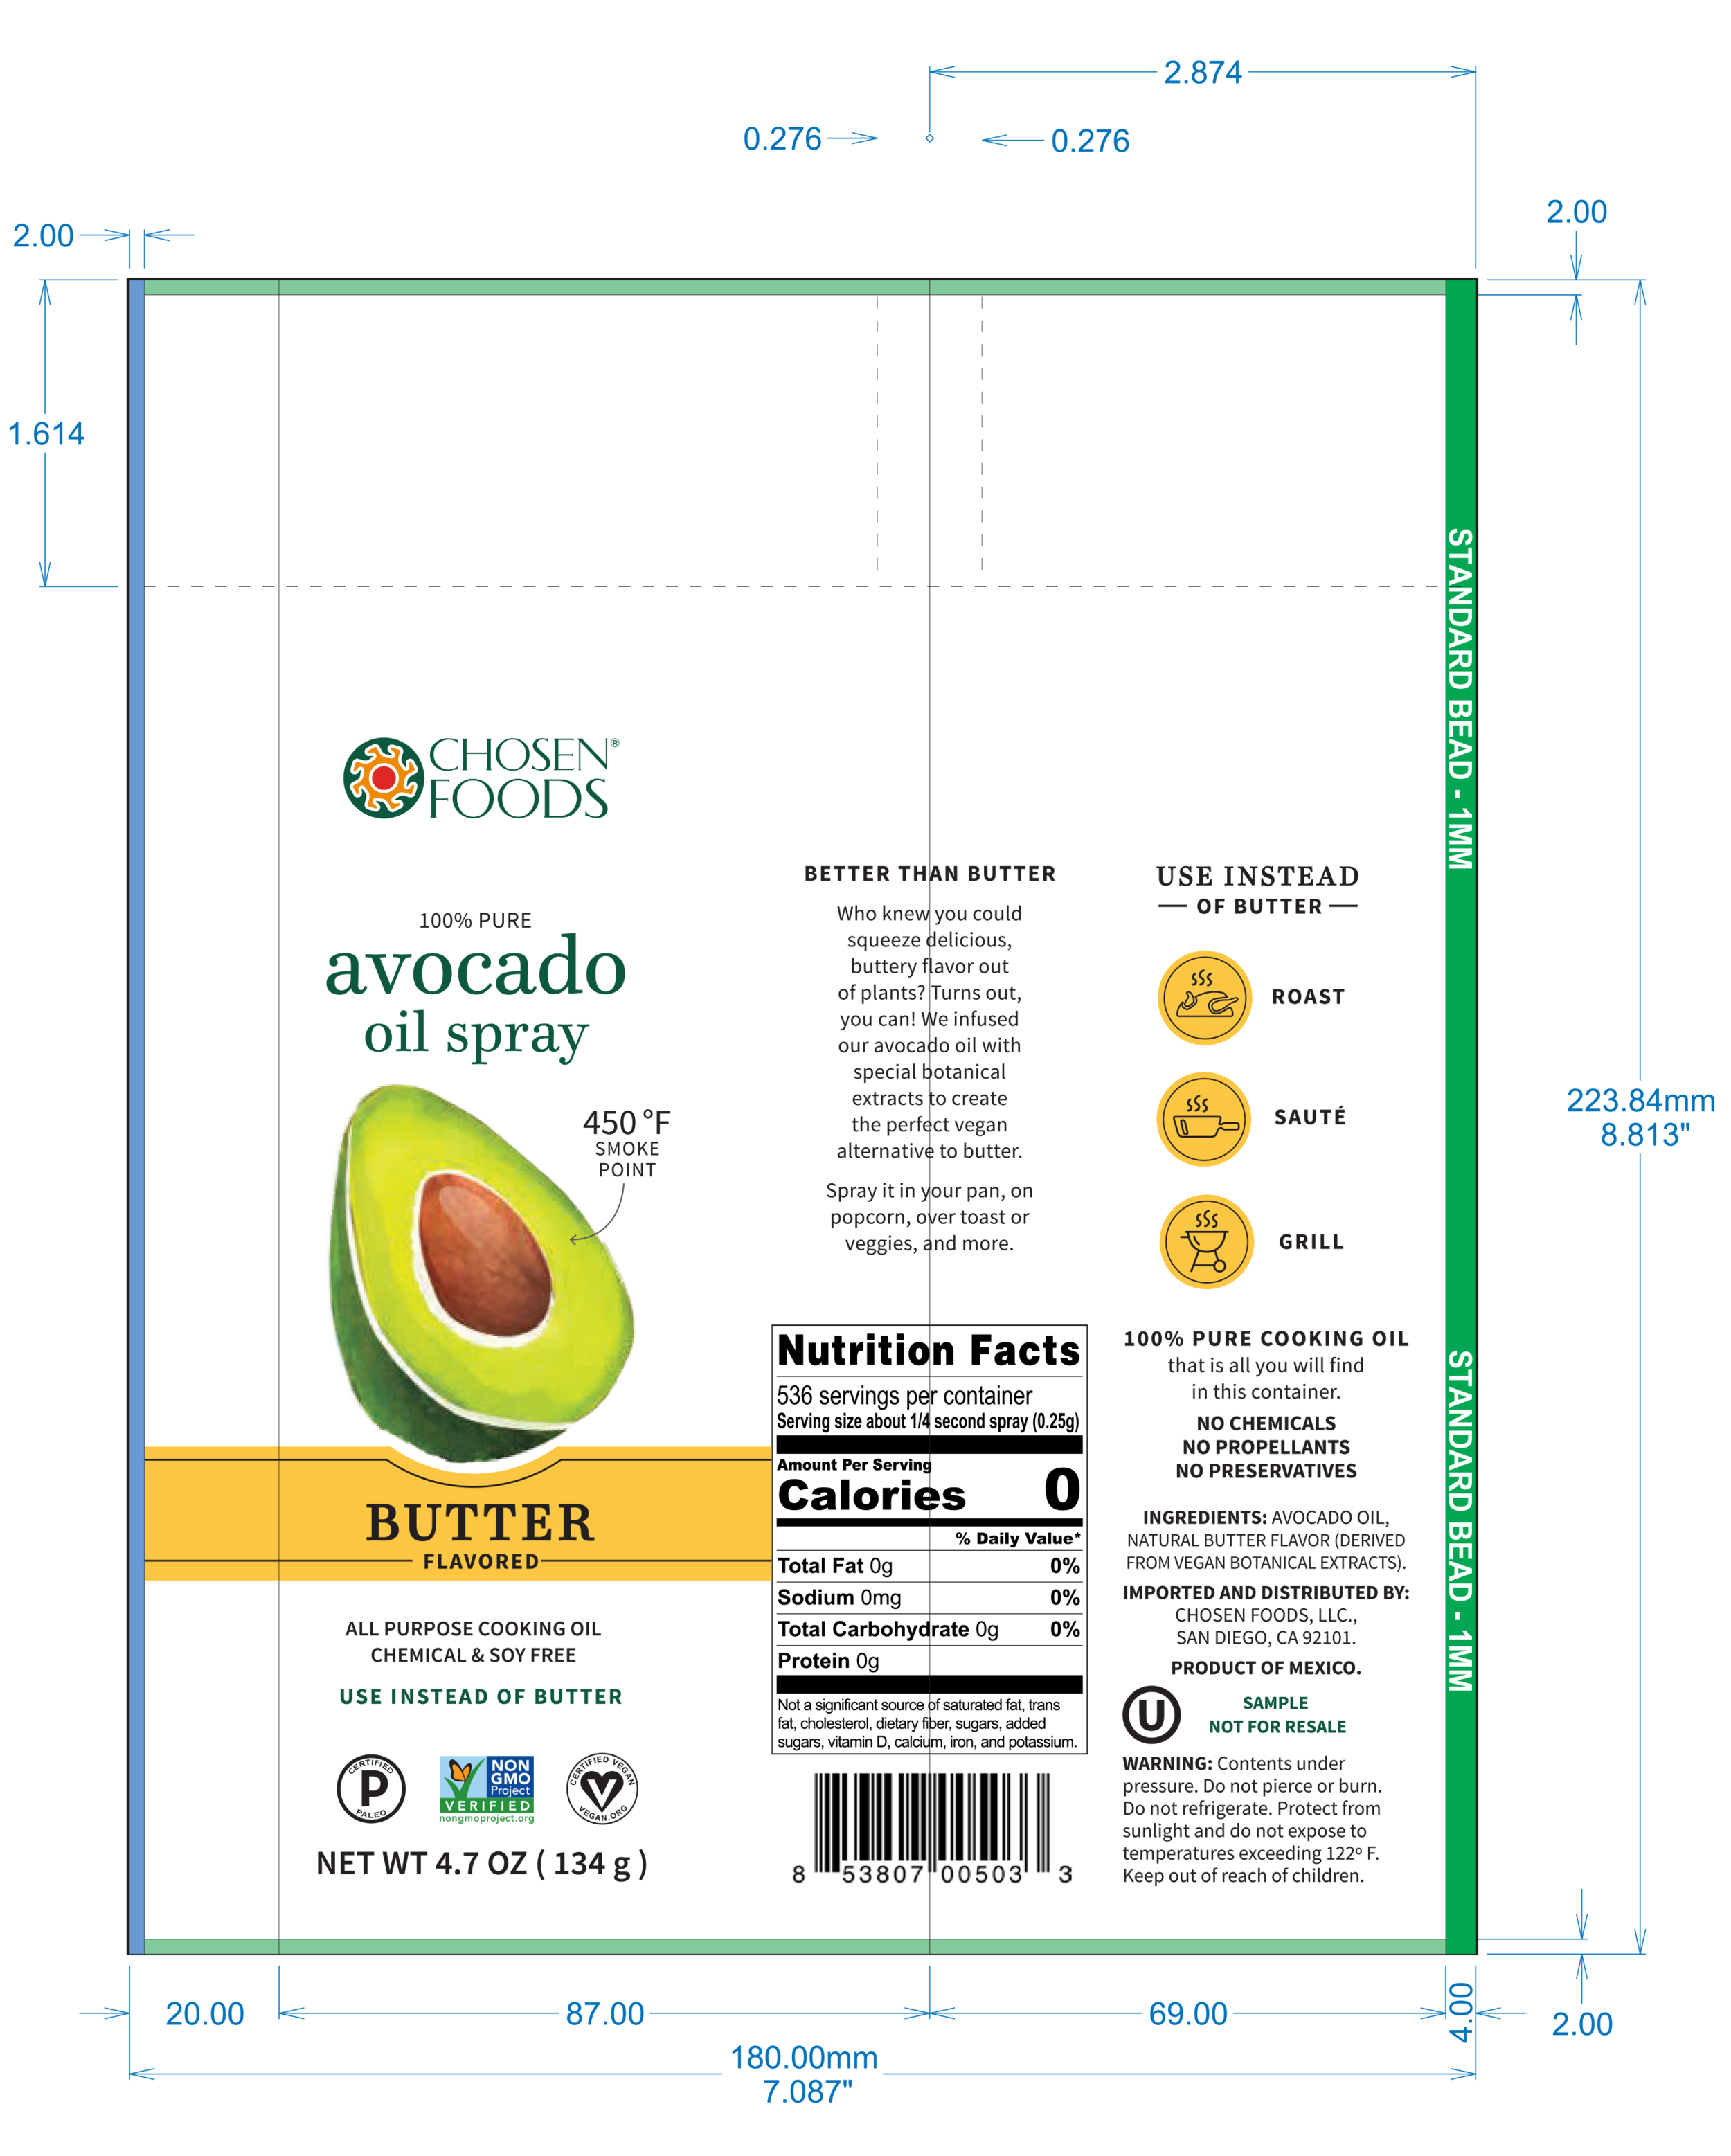 US_ButterAvocado Oil Spray_SLEEVER_SAMPLE_FAW_OL_LoRes.png